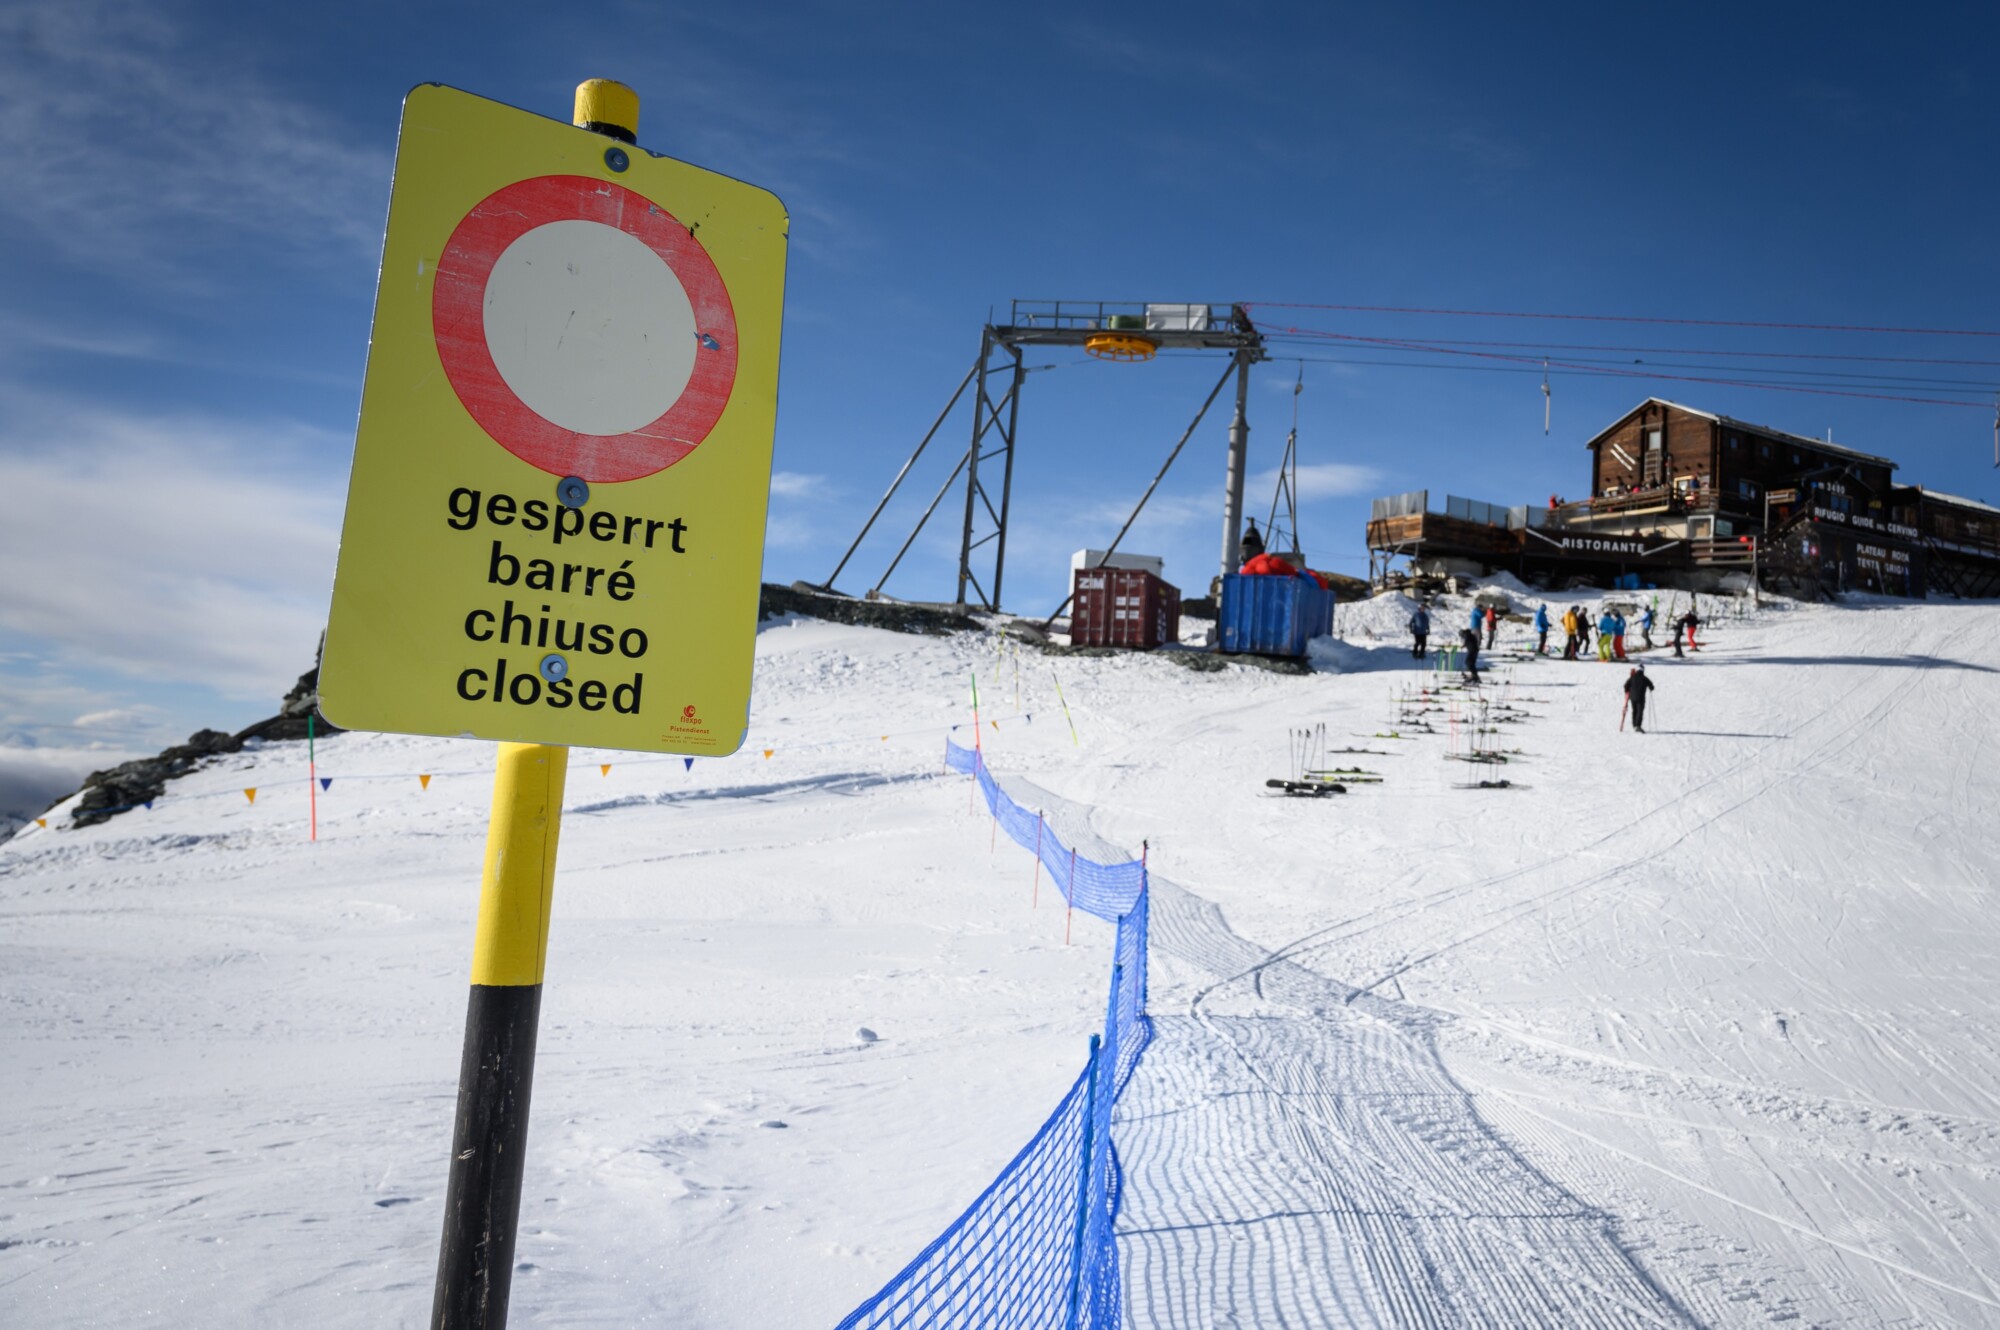 Italy Won’t Open Its Ski Slopes Due to Virus Fears